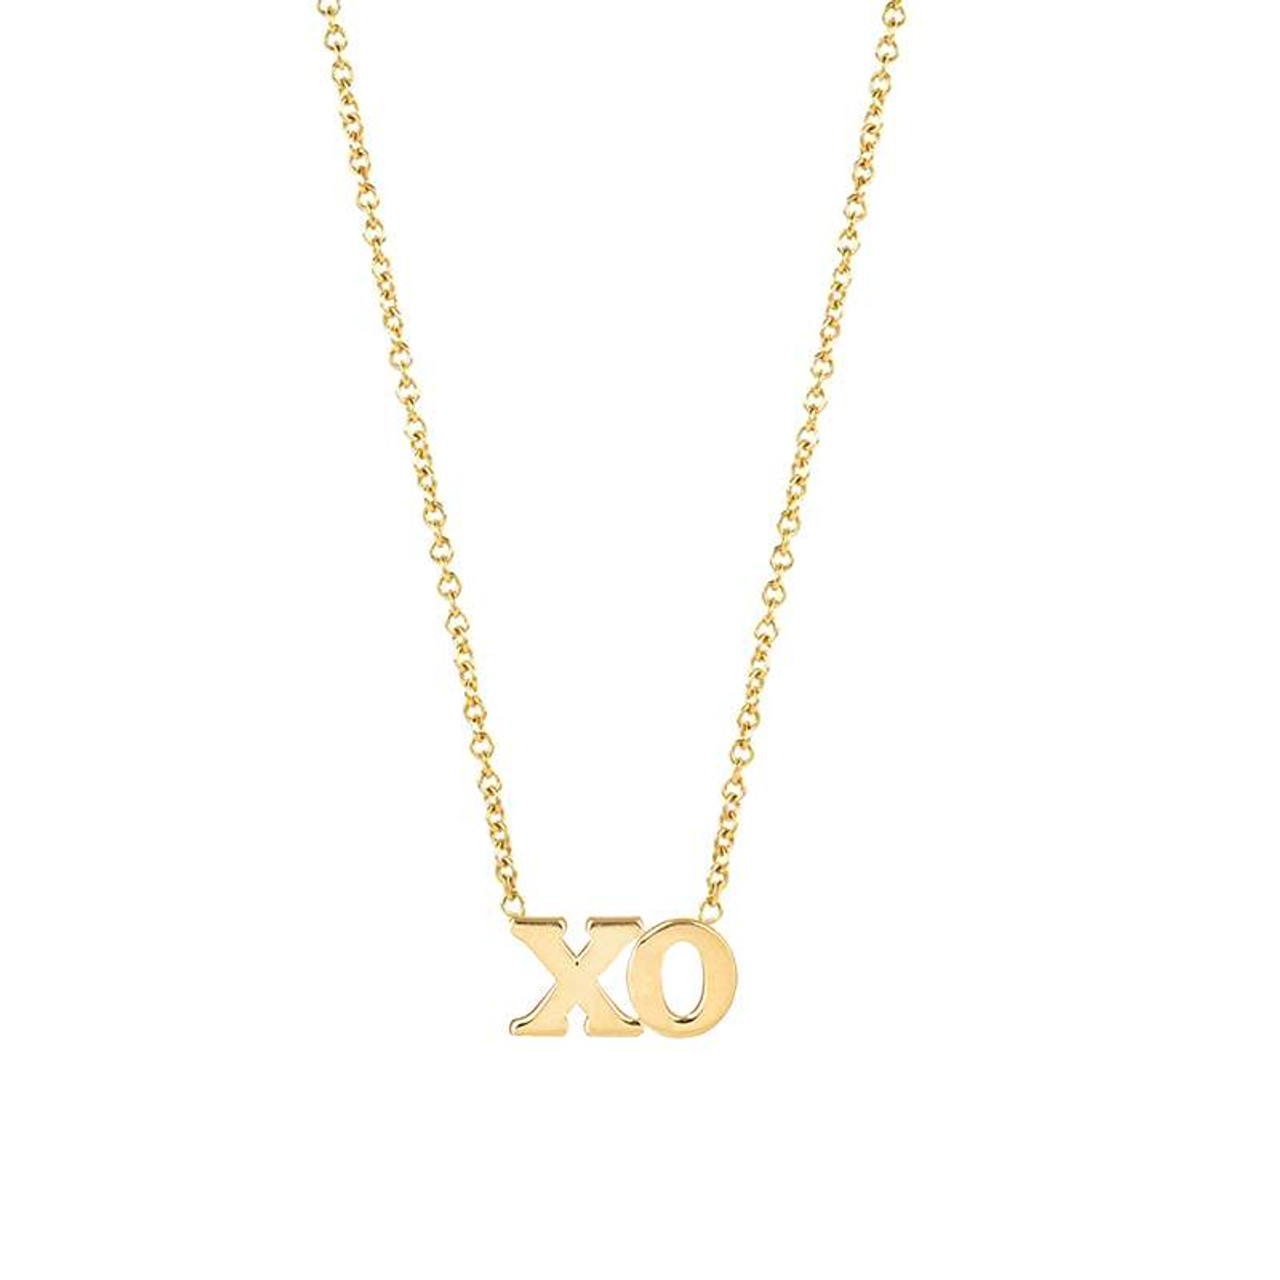 Aresa New York - Lessing No. 9 XO Necklaces - 18K Yellow Gold with 1.0 –  Robinson's Jewelers